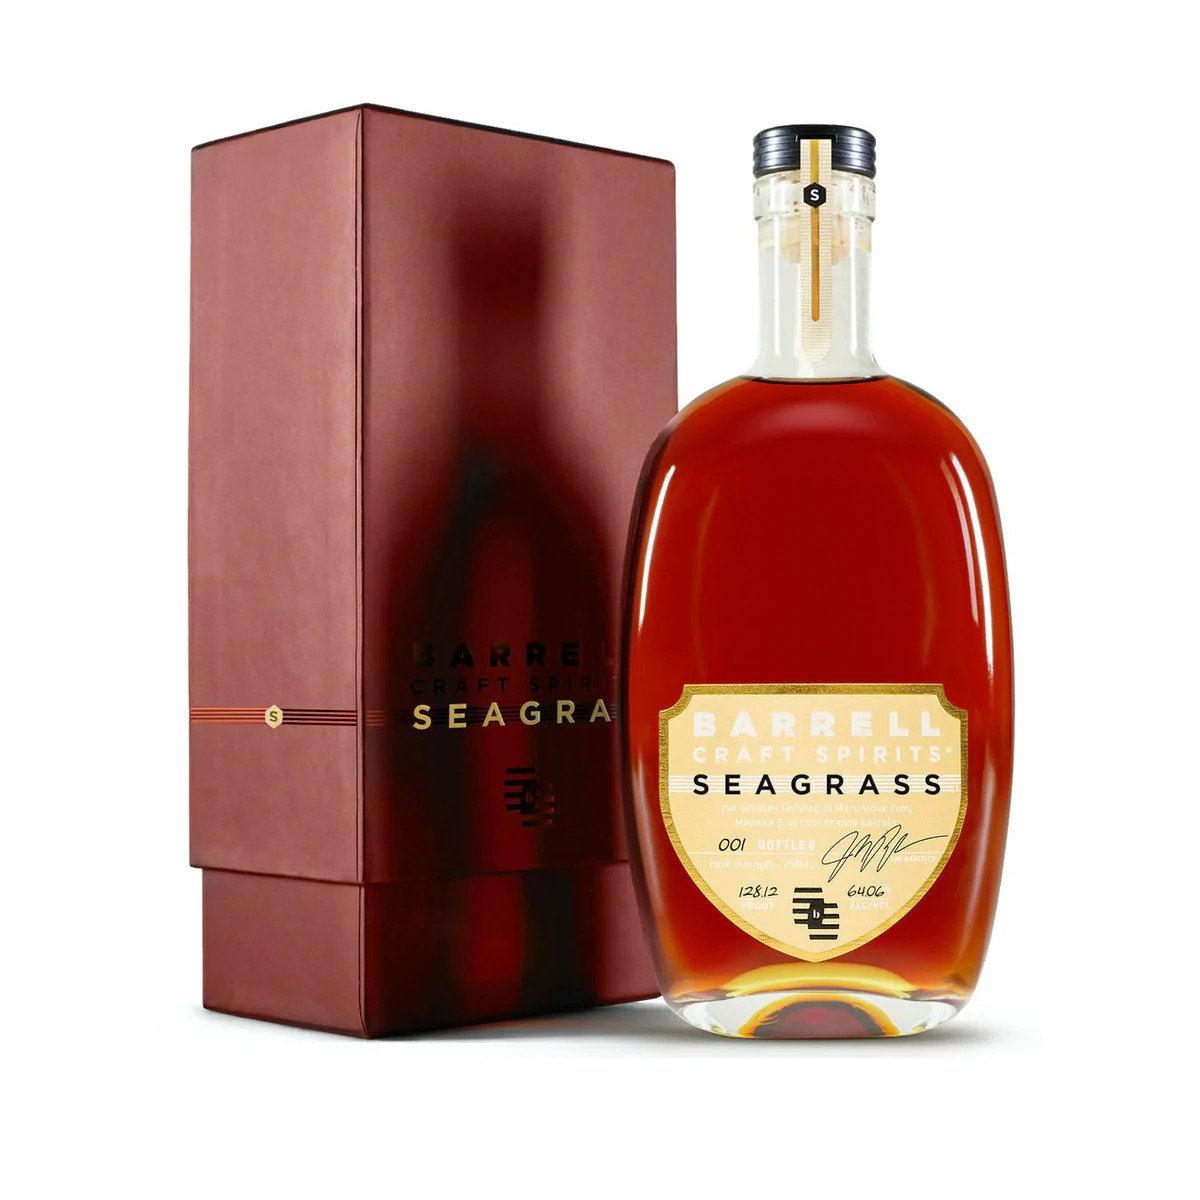 Barrell Craft Spirits Limited Edition Gold Label Seagrass Whiskey - De Wine Spot | DWS - Drams/Whiskey, Wines, Sake